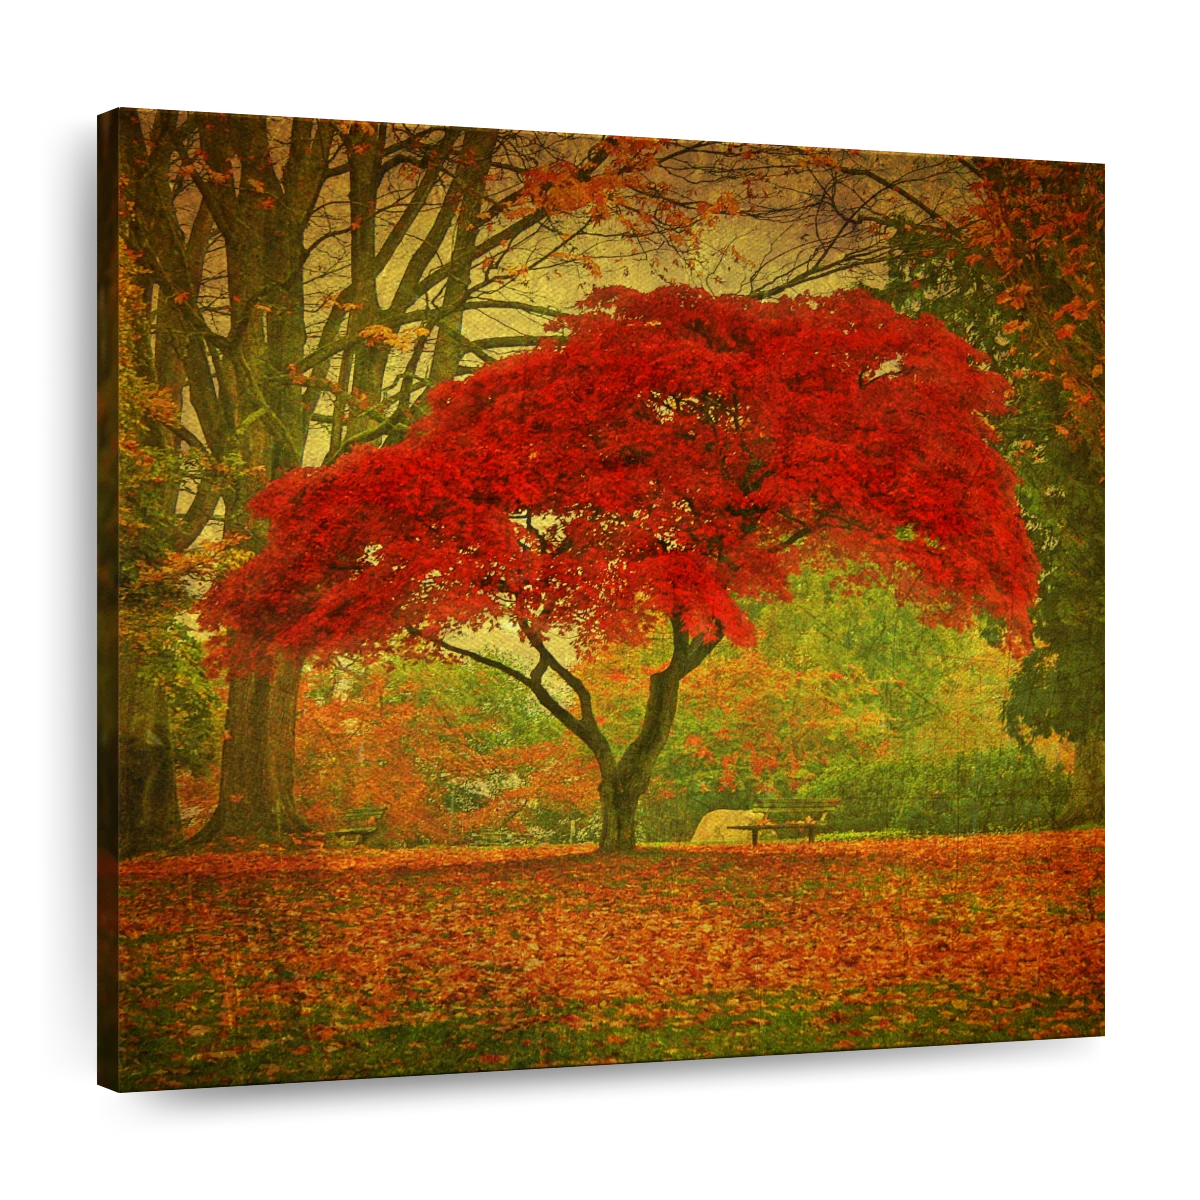 maple trees in autumn painting